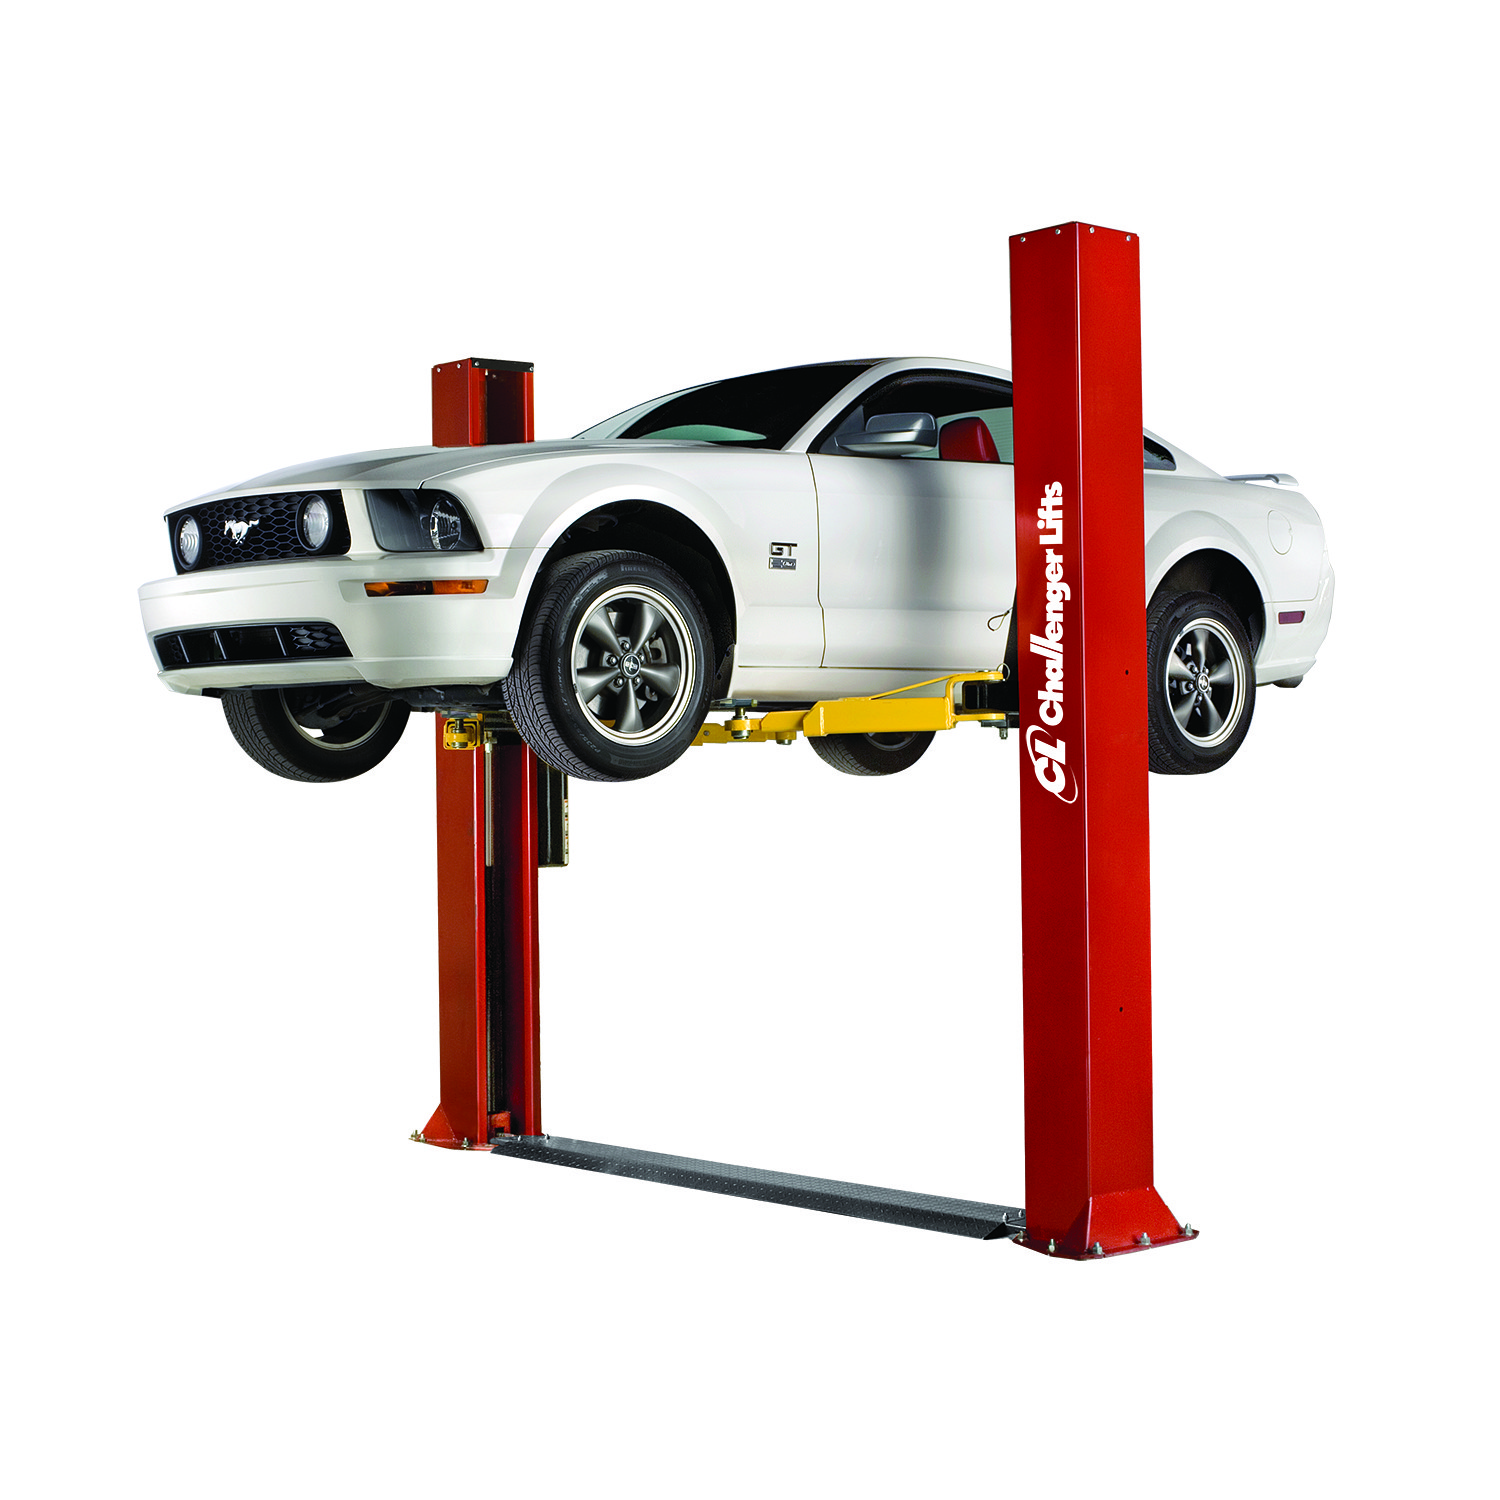 With a 9,000 lb. capacity and 10’ 7/8” overall column height, Challenger’s CLFP9 2-post is ideal for low ceiling applications. 3-stage front and 3-stage rear arms provide maximum sweep, arm retraction and reach. A low-profile drive-over floor plate allows for easy vehicle positioning, which makes it great for home enthusiast garages or professional service shops. The CLFP9 also features double-telescoping screw footpads, a durable powder coat finish and plated arm pins.